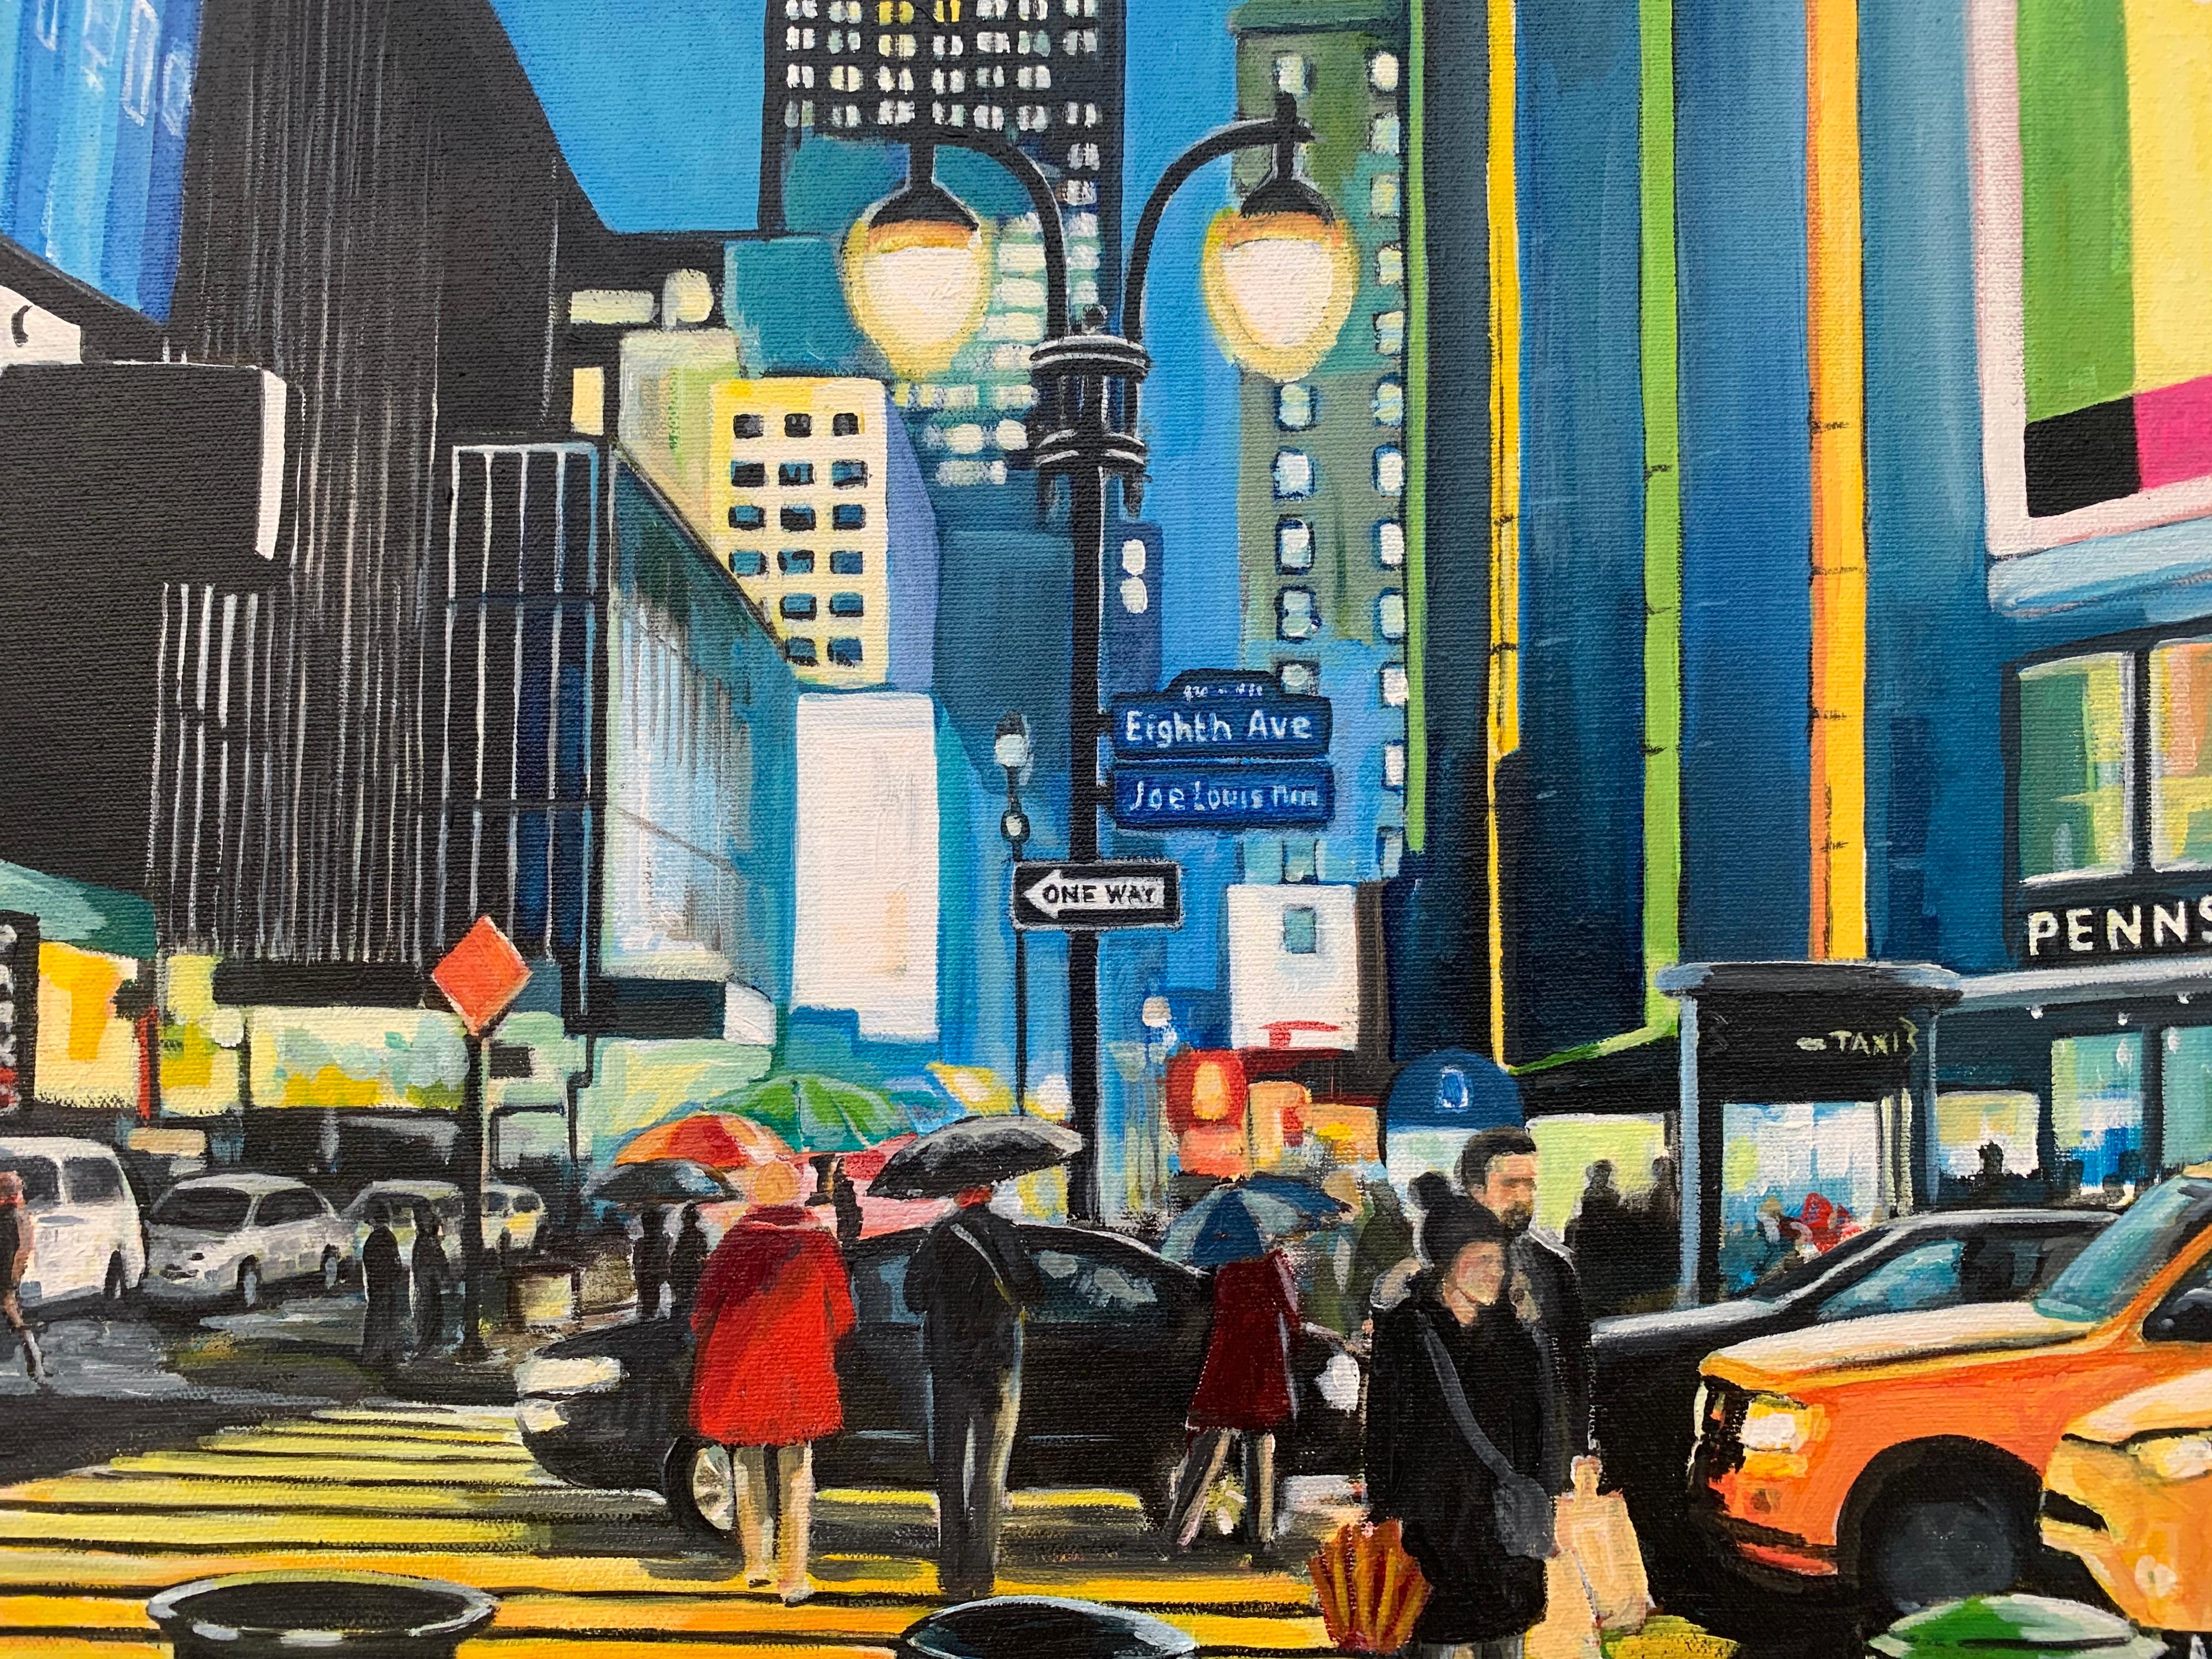 Empire State Building Eighth Avenue New York City by Contemporary British Artist Angela Wakefield. This is a major work from her New York Series.

Art measures 18 x 24 inches
Frame measures 23 x 29 inches

Wakefield's work is a unique blend of